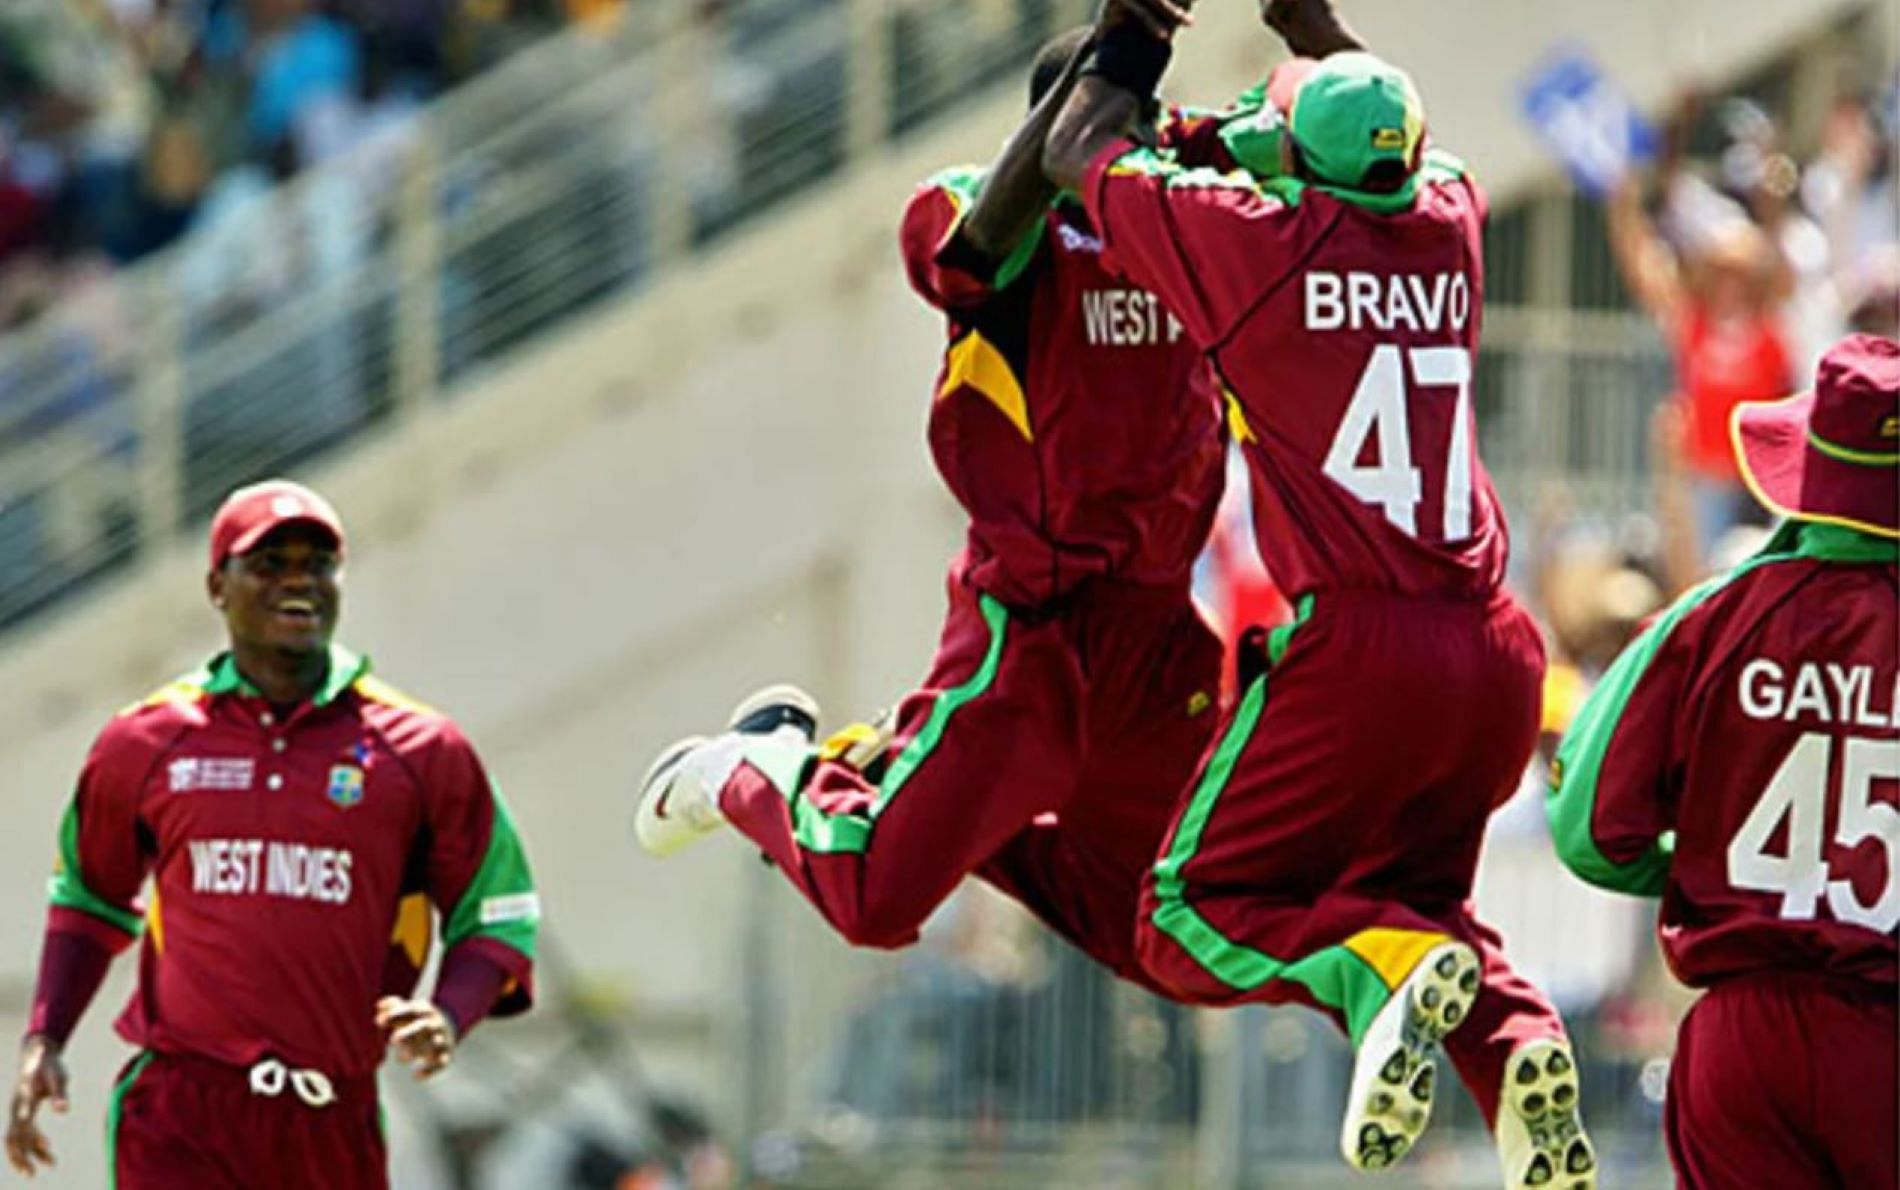 The West Indies provided their fans plenty to cheer about in the 2007 World Cup opener.